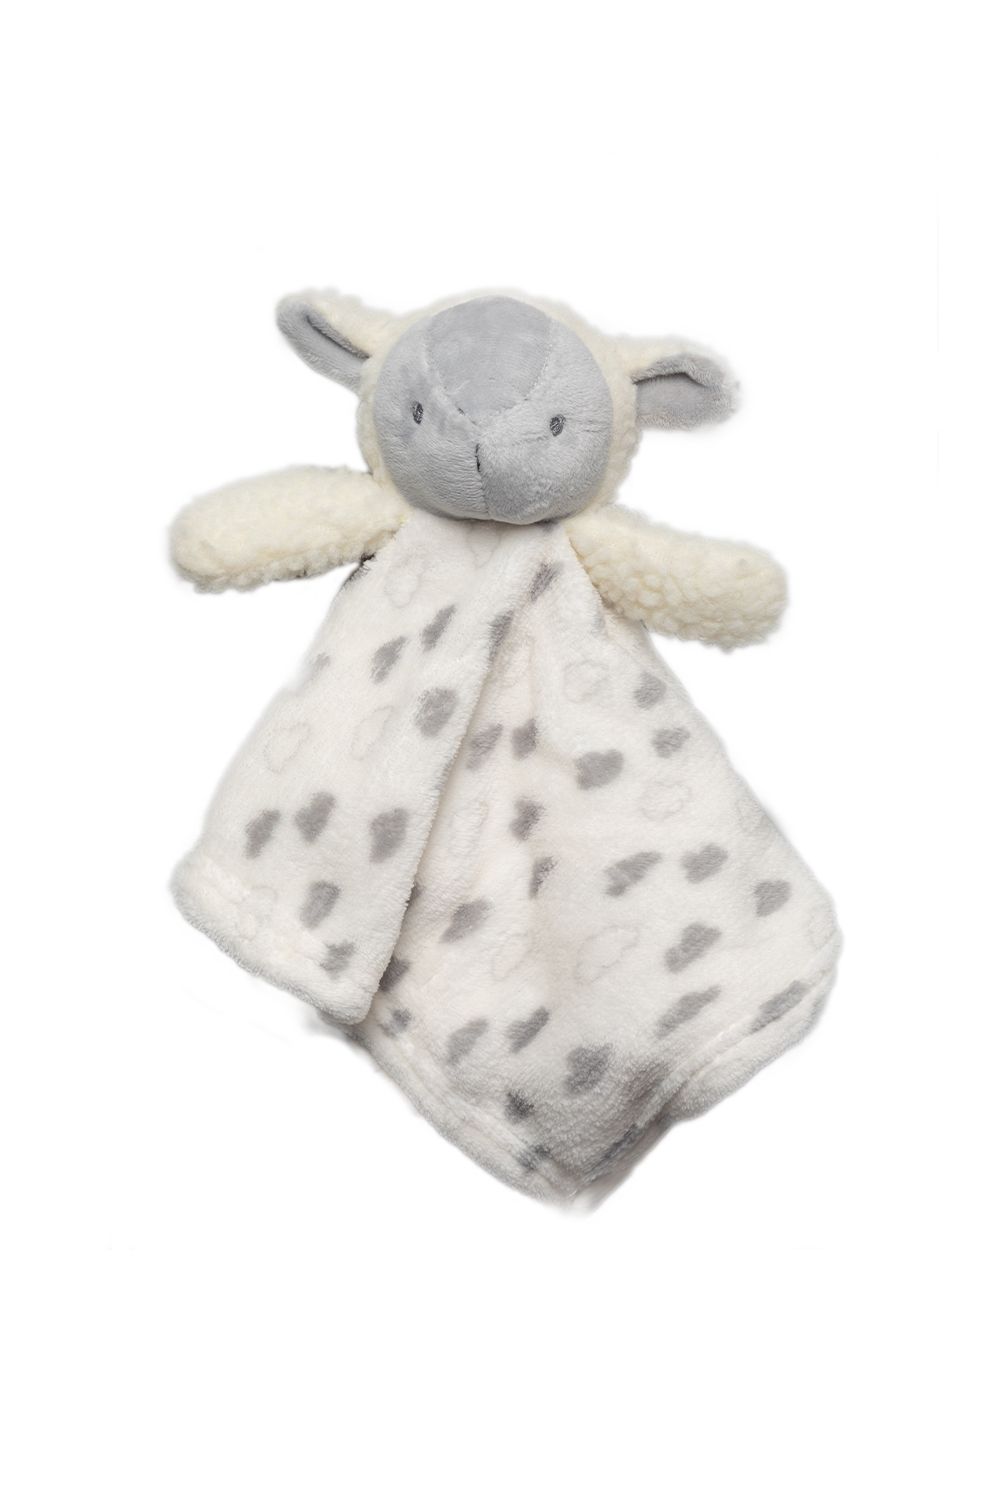 This adorable Snuggle Tots comforter and blanket set make the perfect gift for the little one in your life. The two-piece set features a beautiful, fluffy blanket with a grey cloud print all over, and a comforter with the same print with a cuddly sheep toy attached. This set makes a lovely baby shower present.